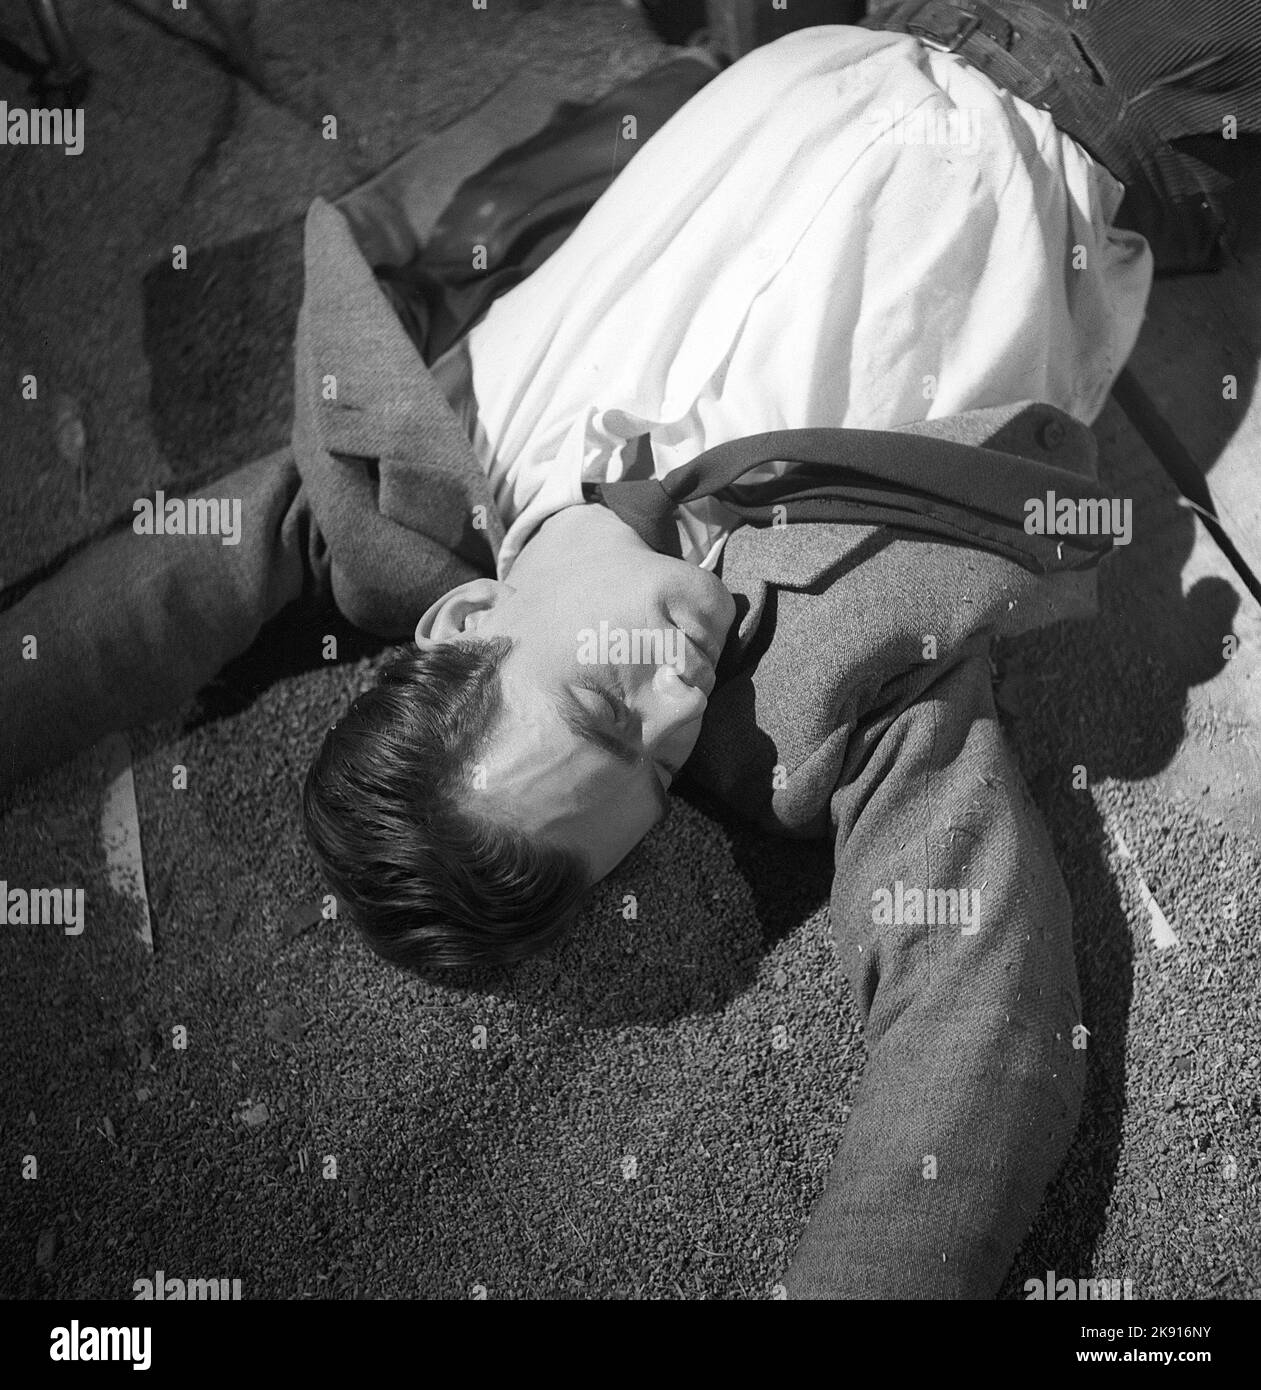 Man in the 1940s. A man on the floor with his eyes shut, a film scene from a Ingmar Bergmans movie and actor Birger Malmsten.  Sweden 1948. Photo Kristoffersson ref ref AF19-8 Stock Photo